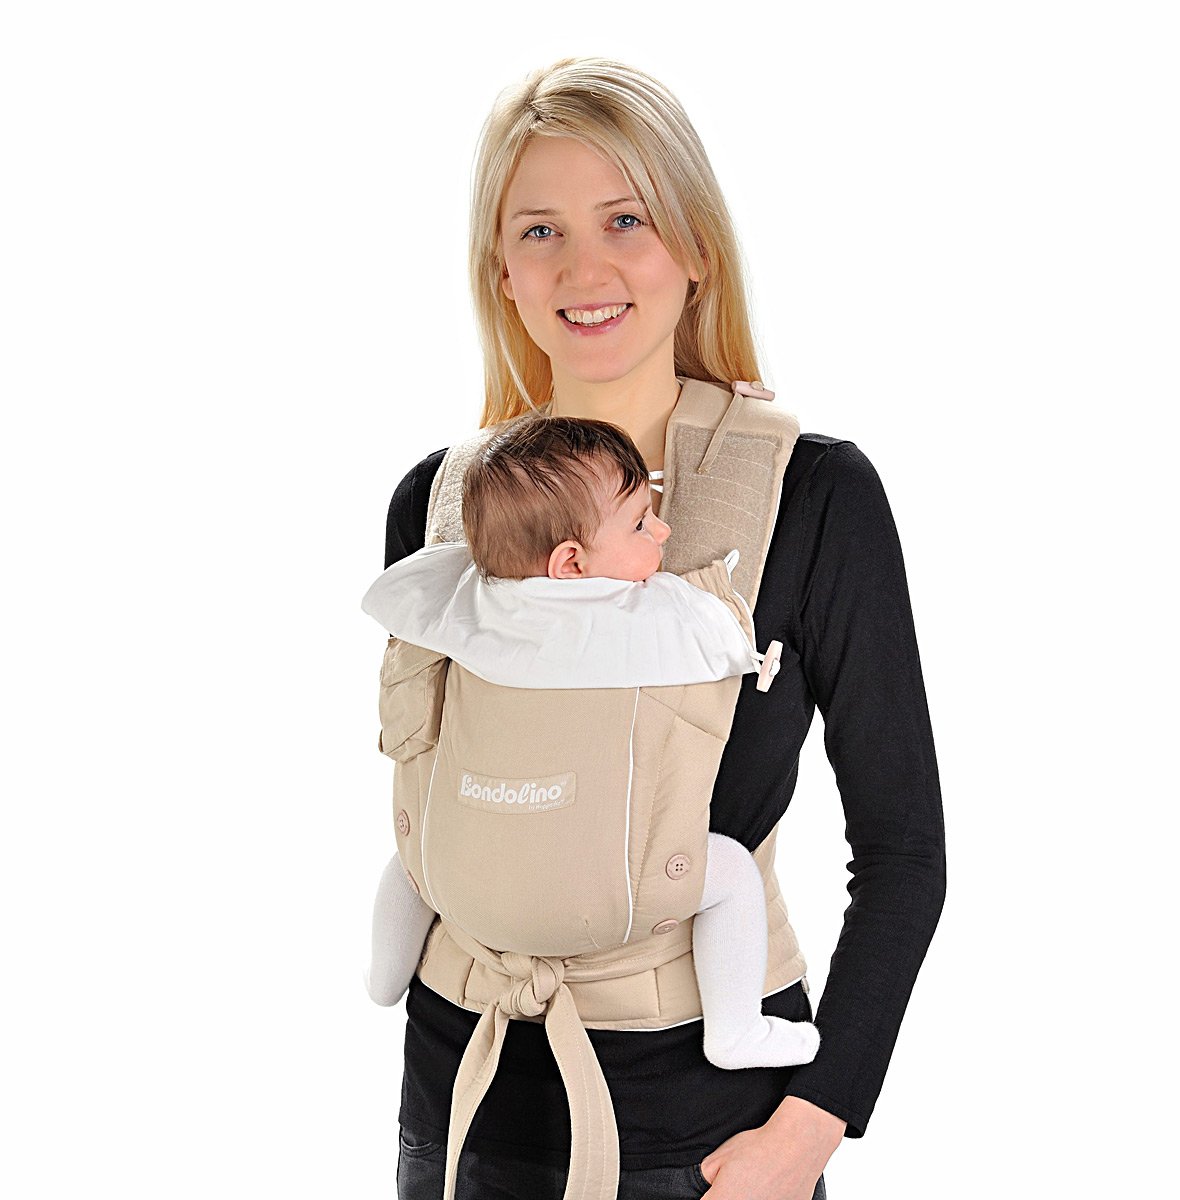 Bondolino Plus Baby Carrier With Tying Instructions  2016